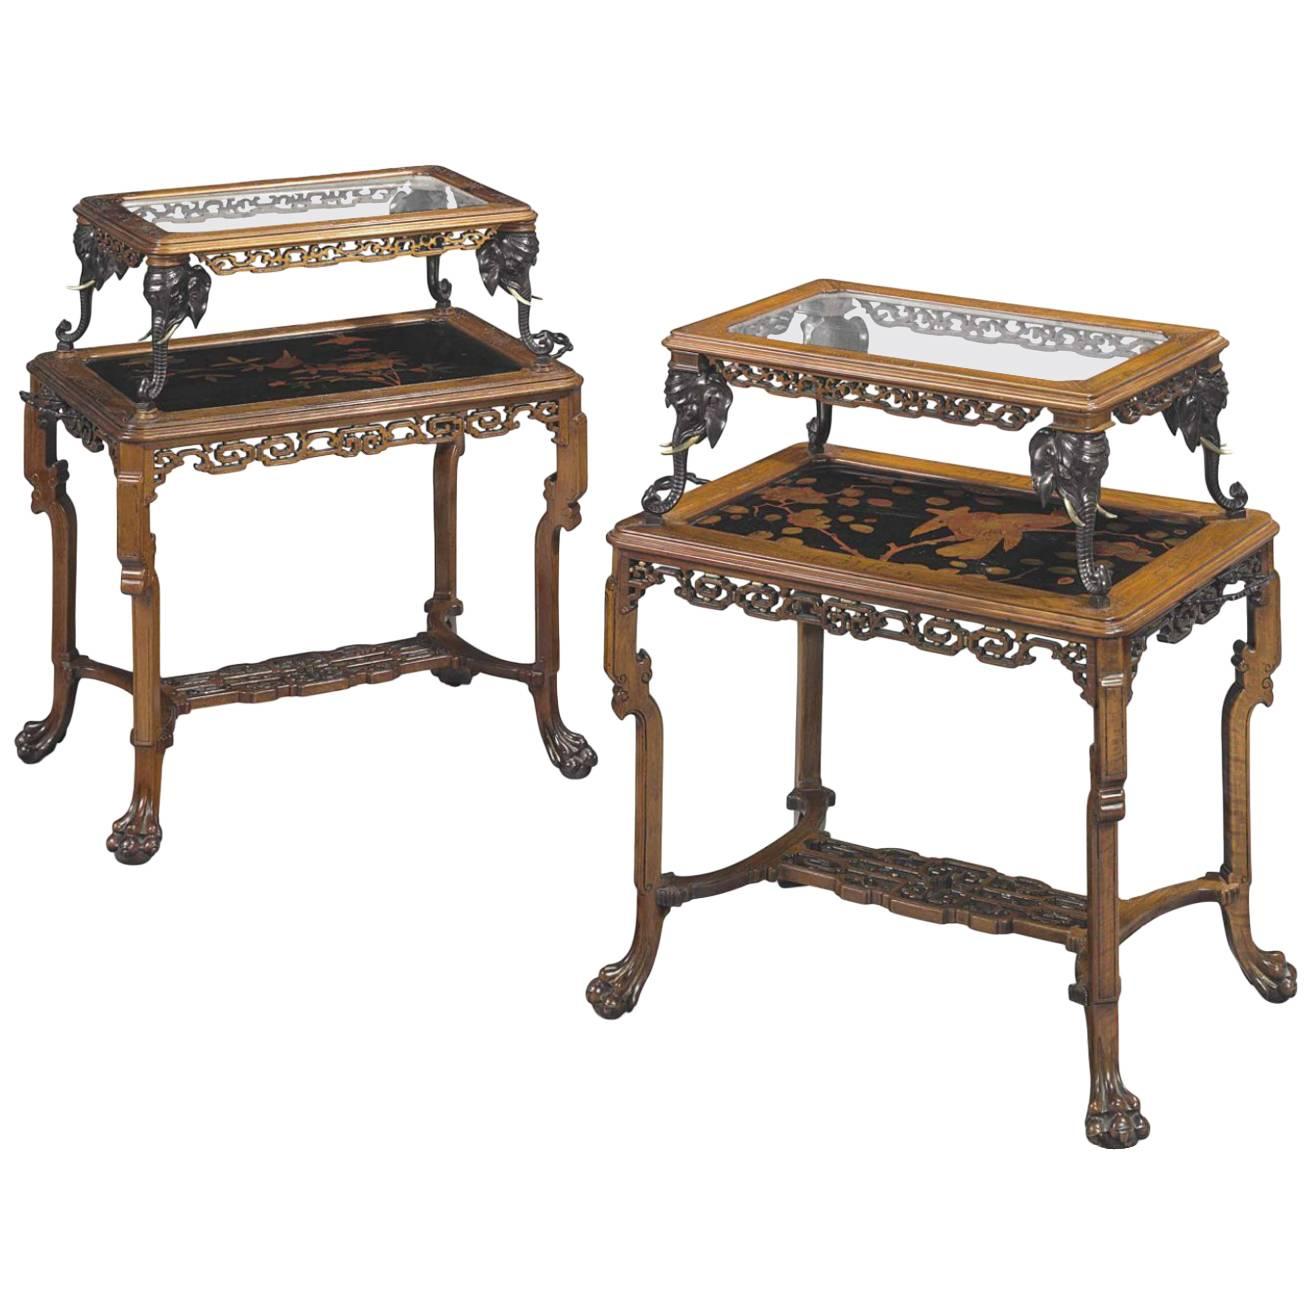 Pair of French Japonisme Bronze, Lacquer, & Hardwood Etageres Tea Tables Chinese